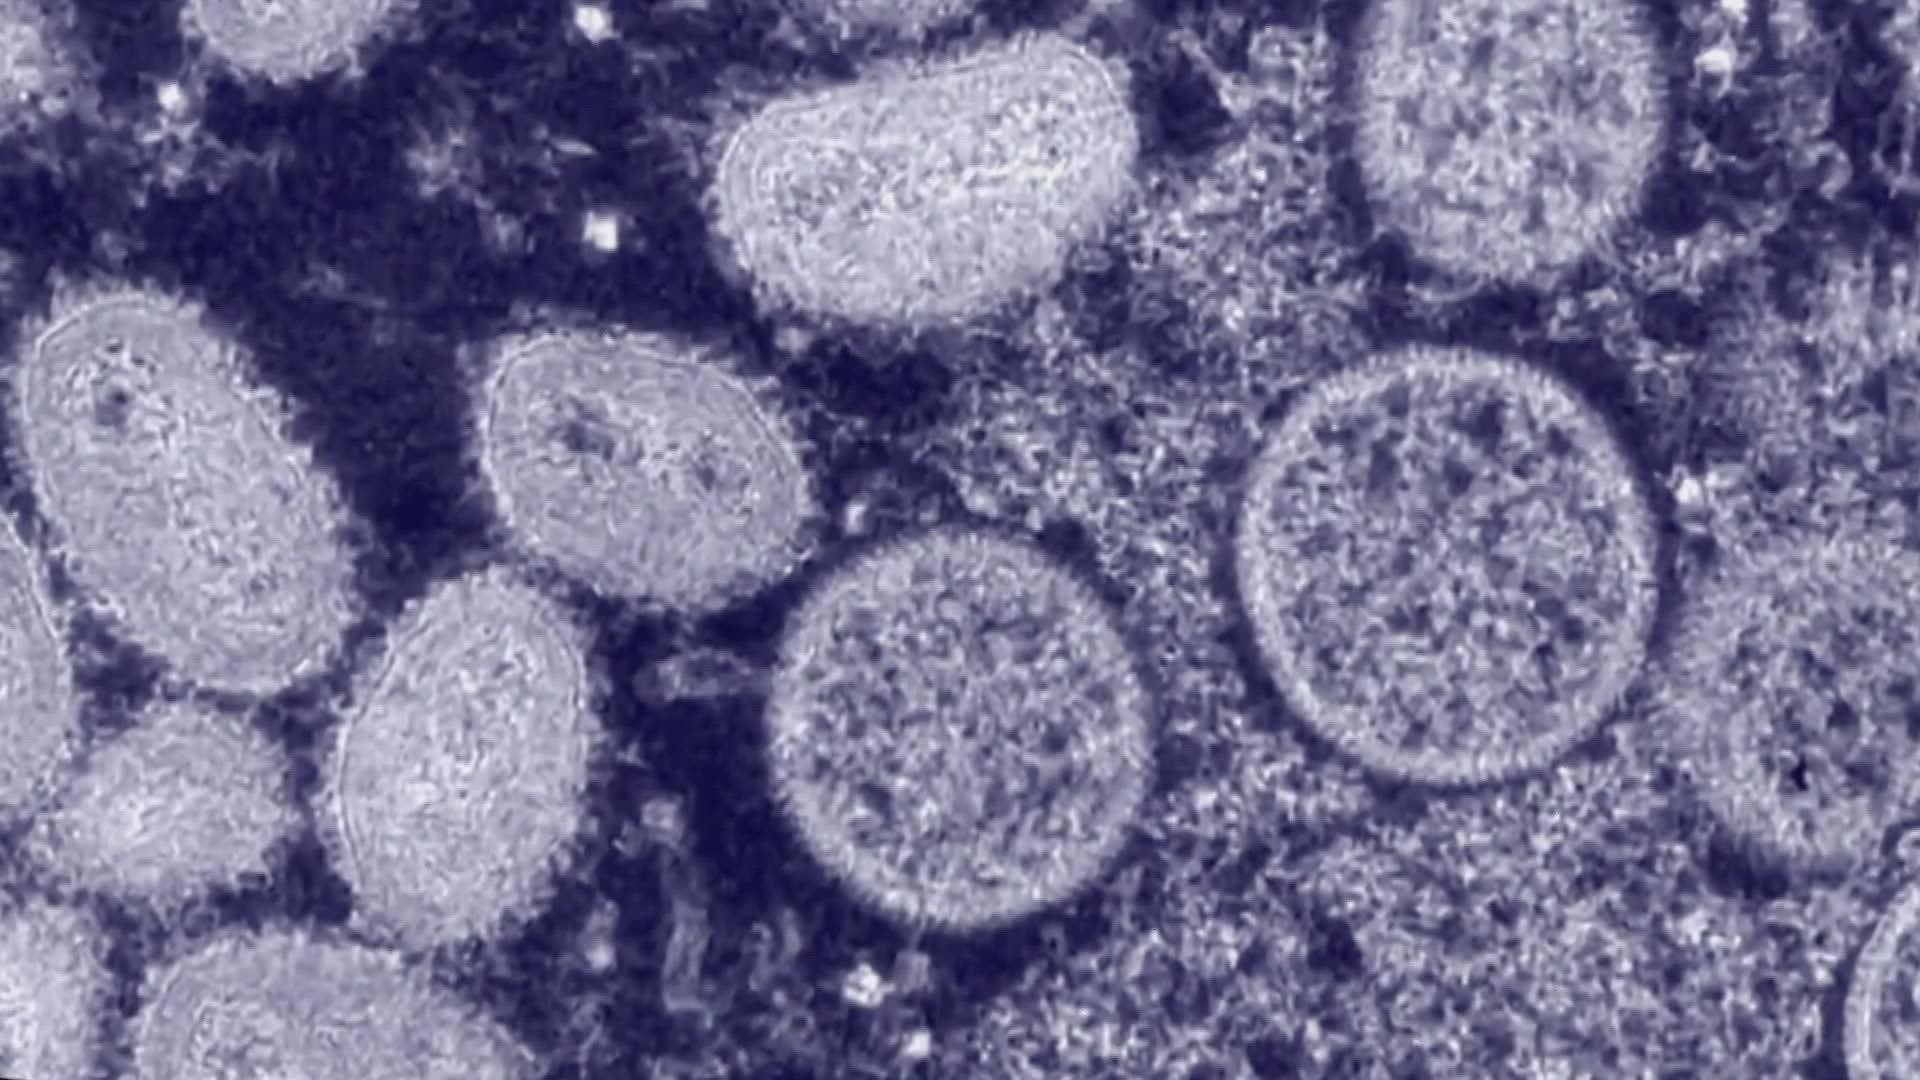 Tacoma-Pierce County health officials say the disease is not as contagious as COVID-19, mainly because it requires close physical contact to spread.